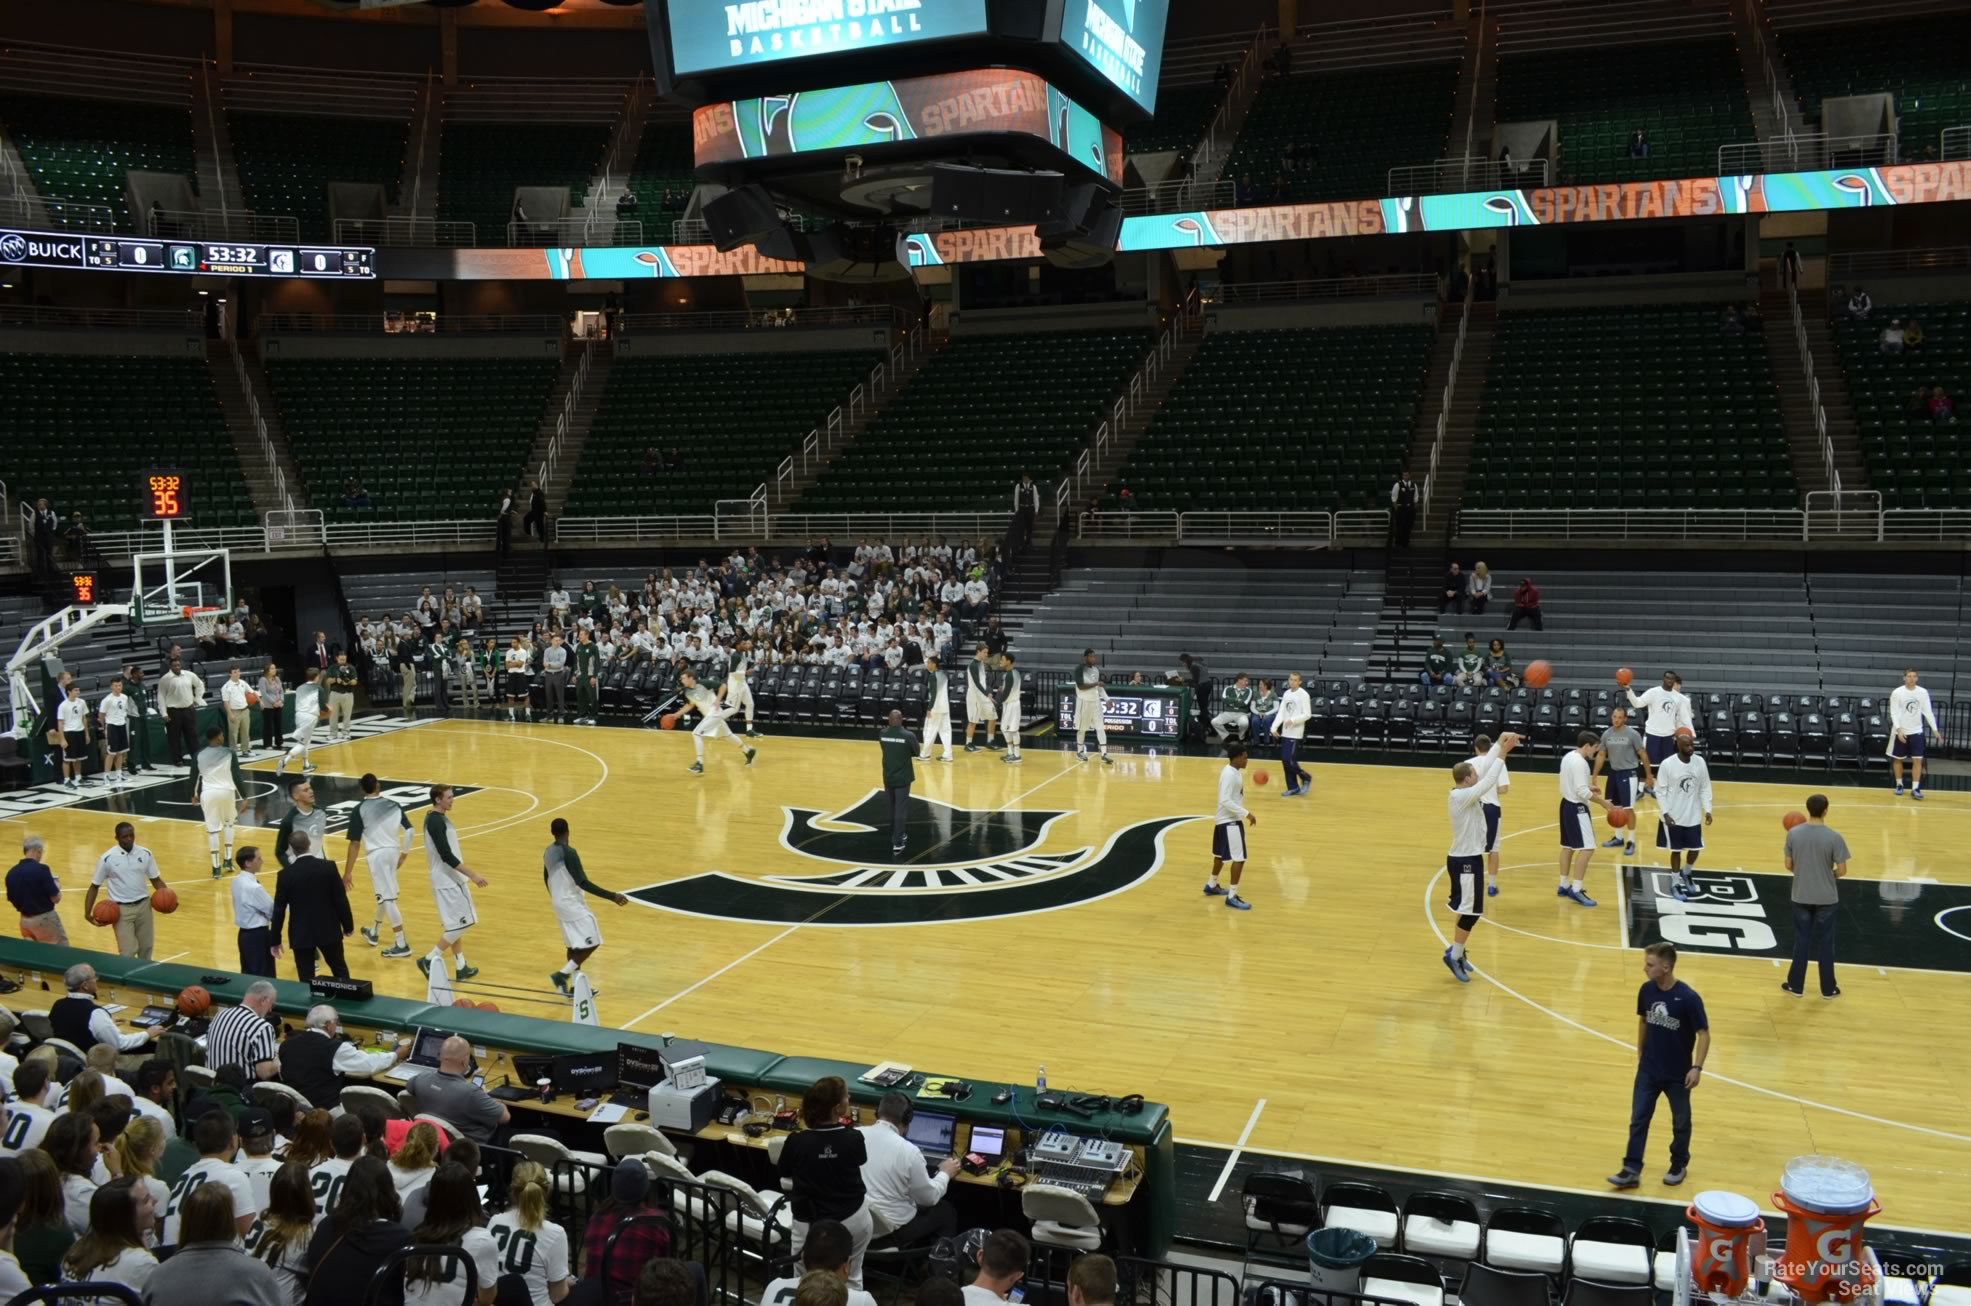 section 110, row 13 seat view  - breslin center